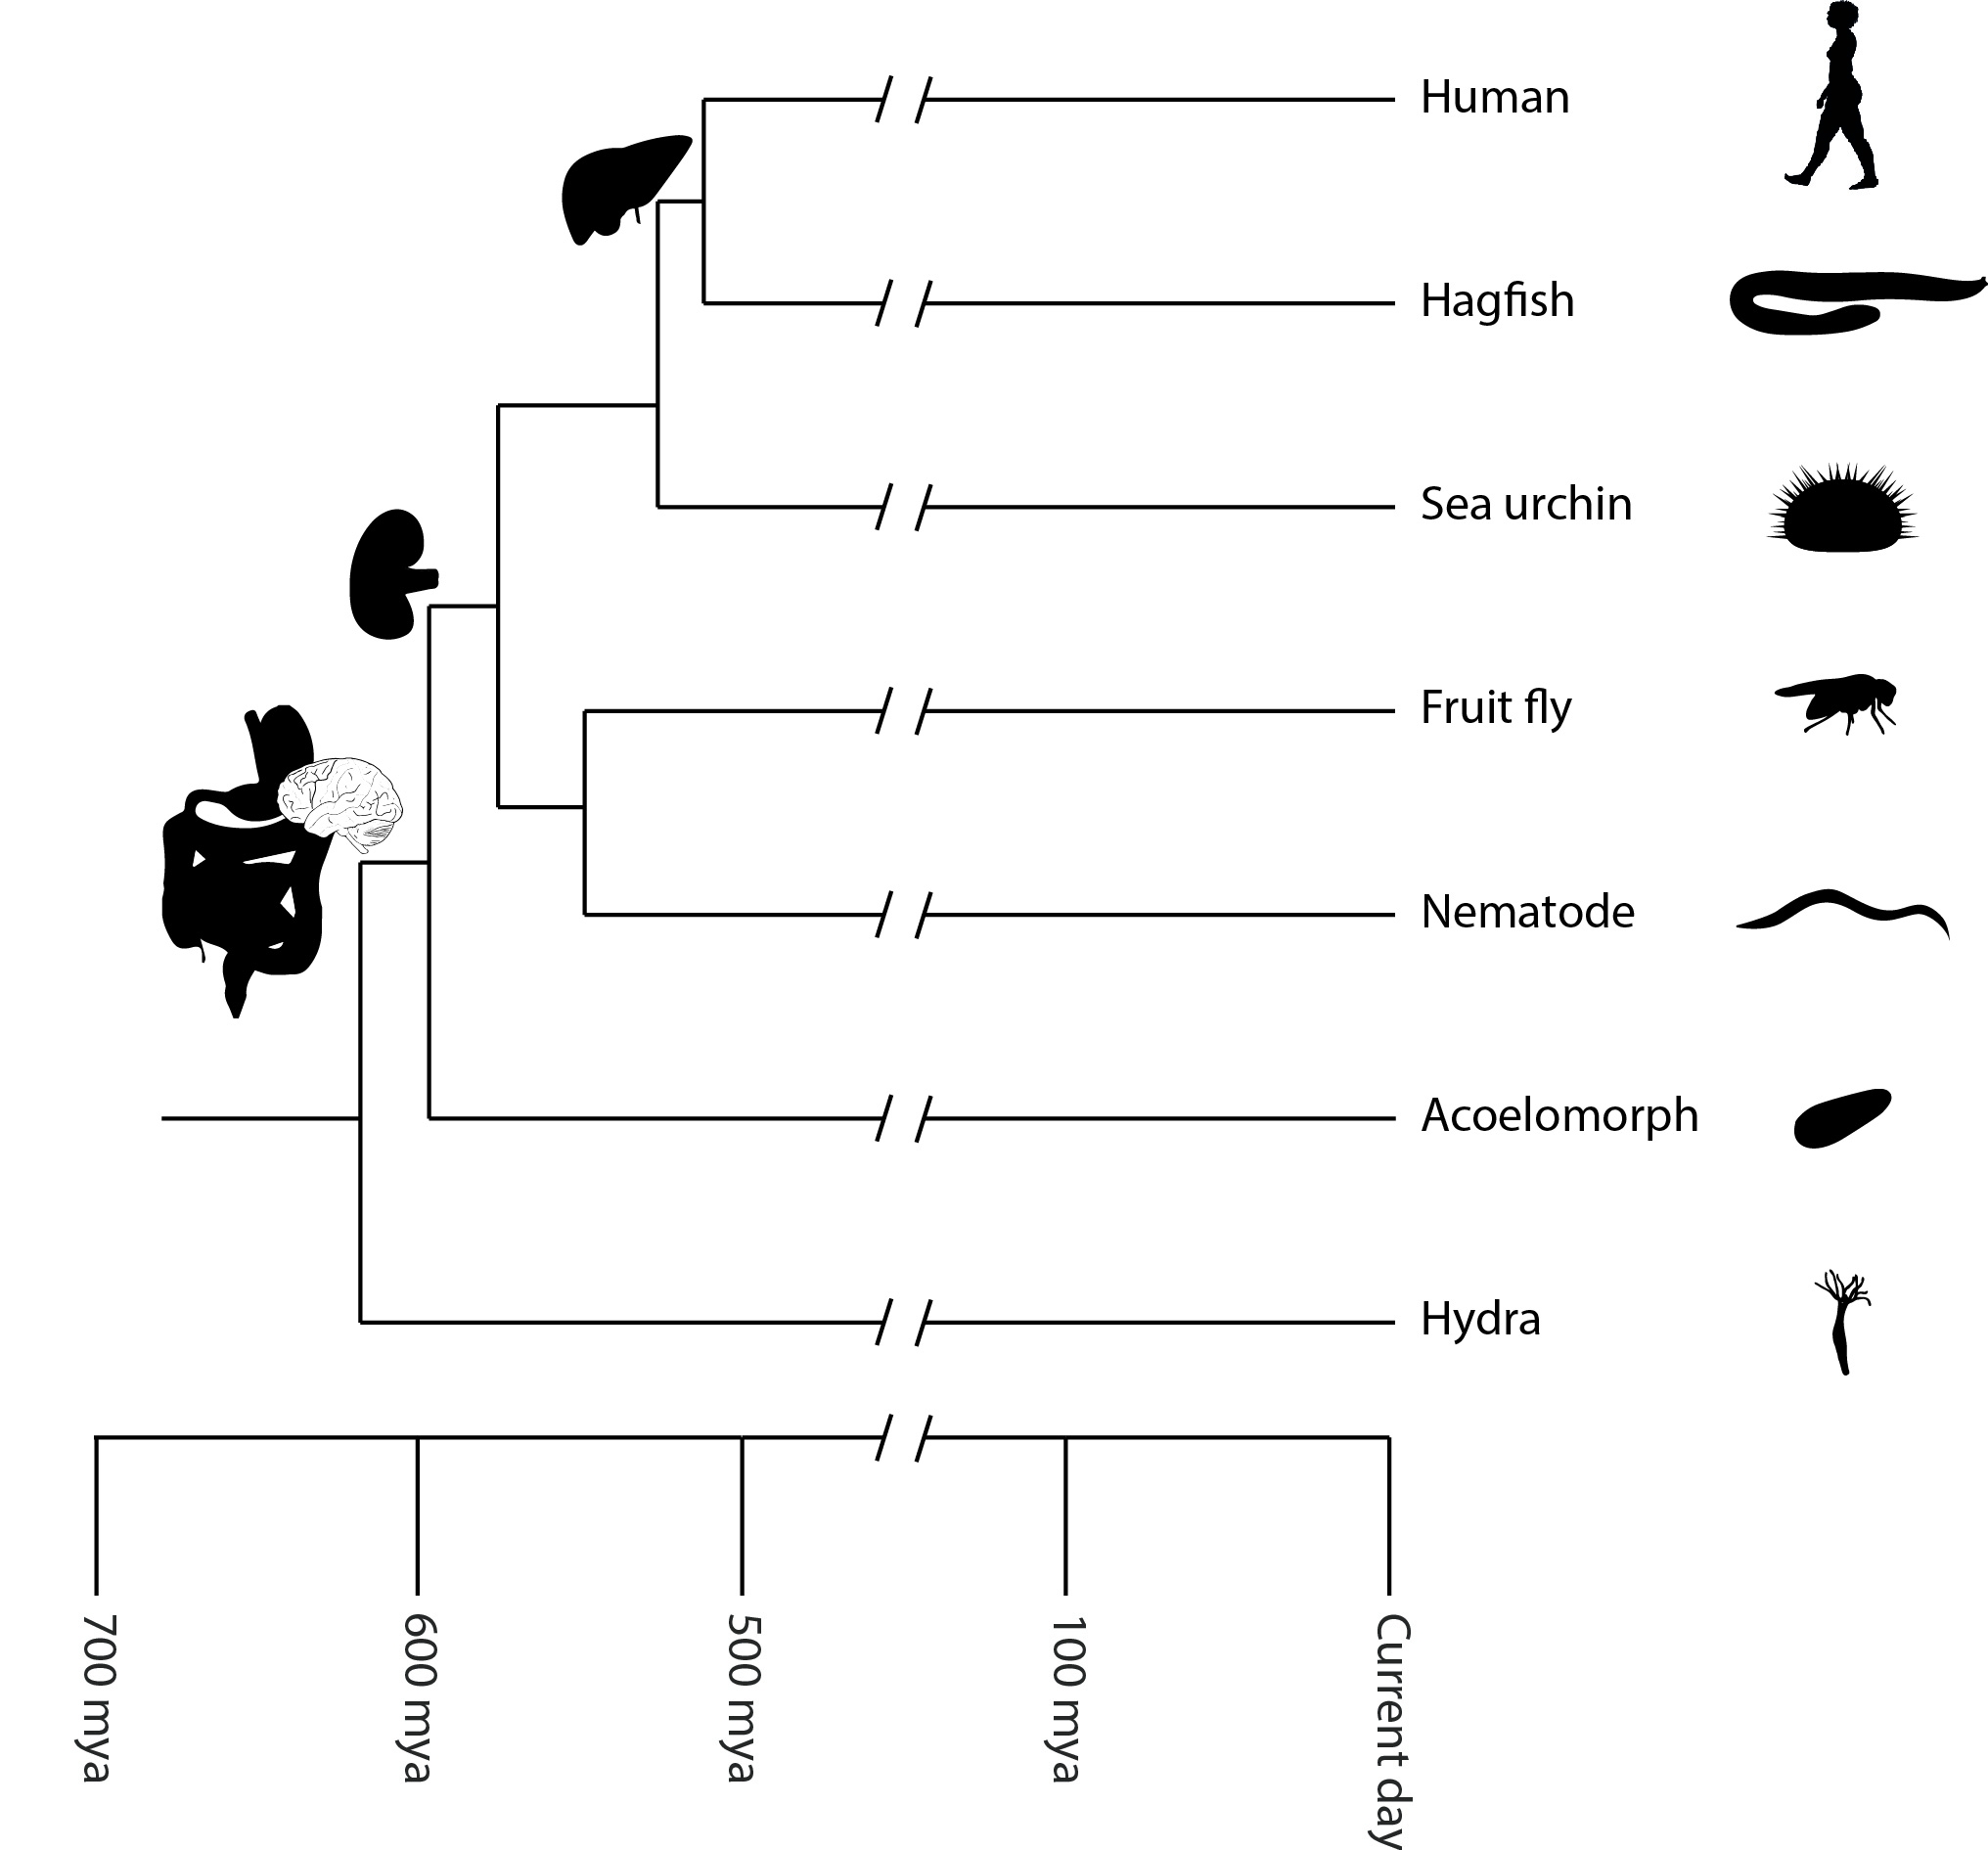 Relationship of major animal lineages with indication of how long ago these animals shared a common ancestor. On the left, important organs are shown, which allows us to determine how long ago these may have evolved.